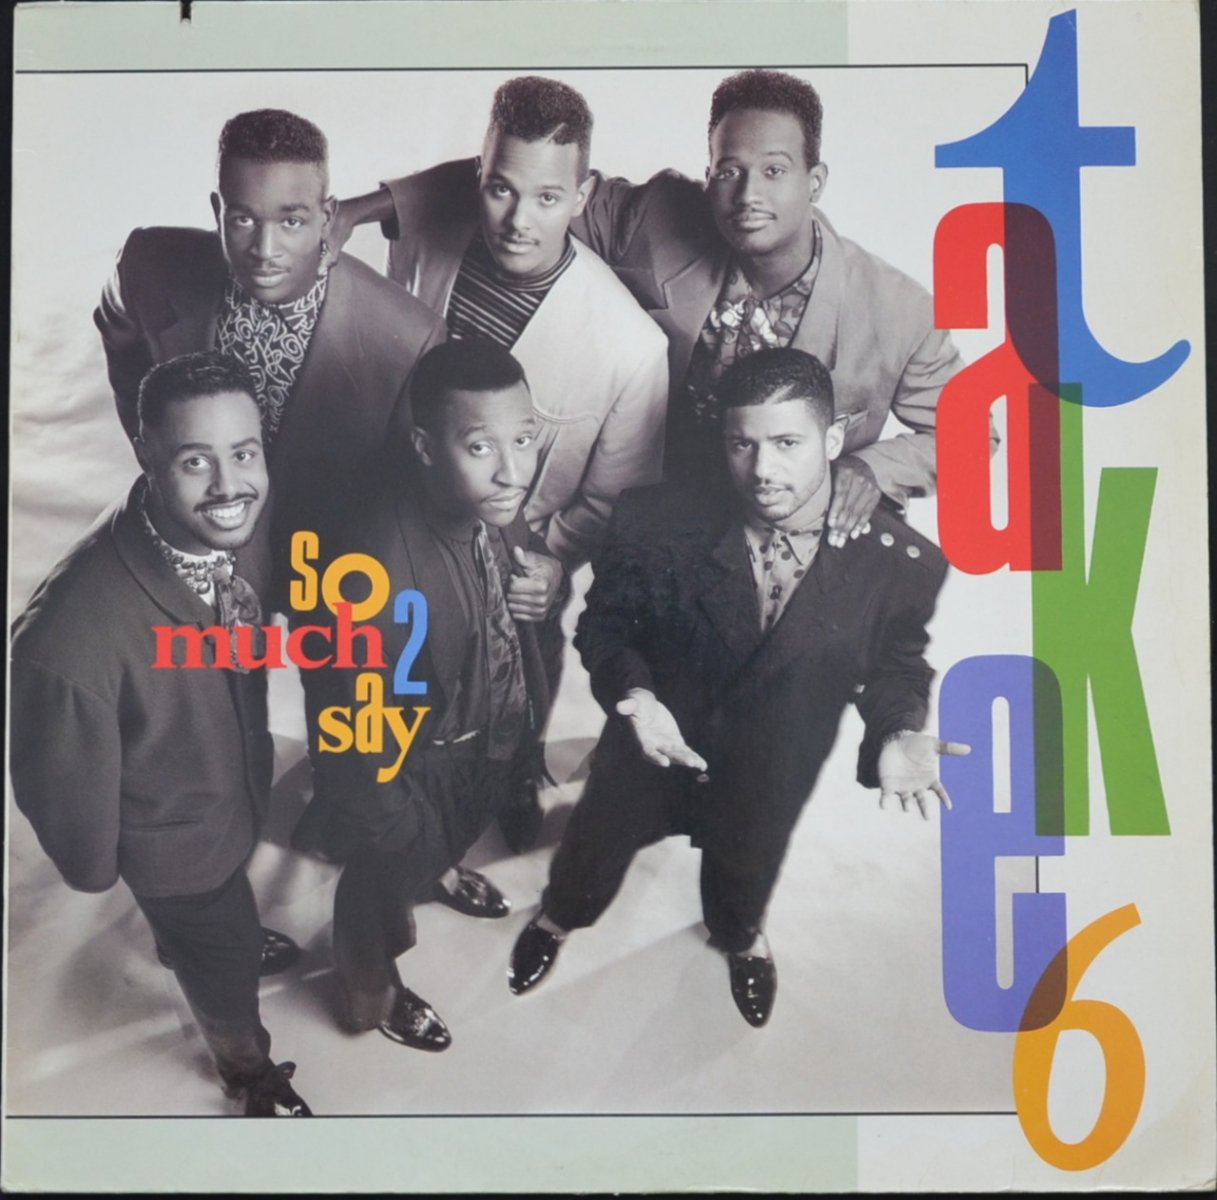 TAKE 6 ‎/ SO MUCH 2 SAY (1LP)